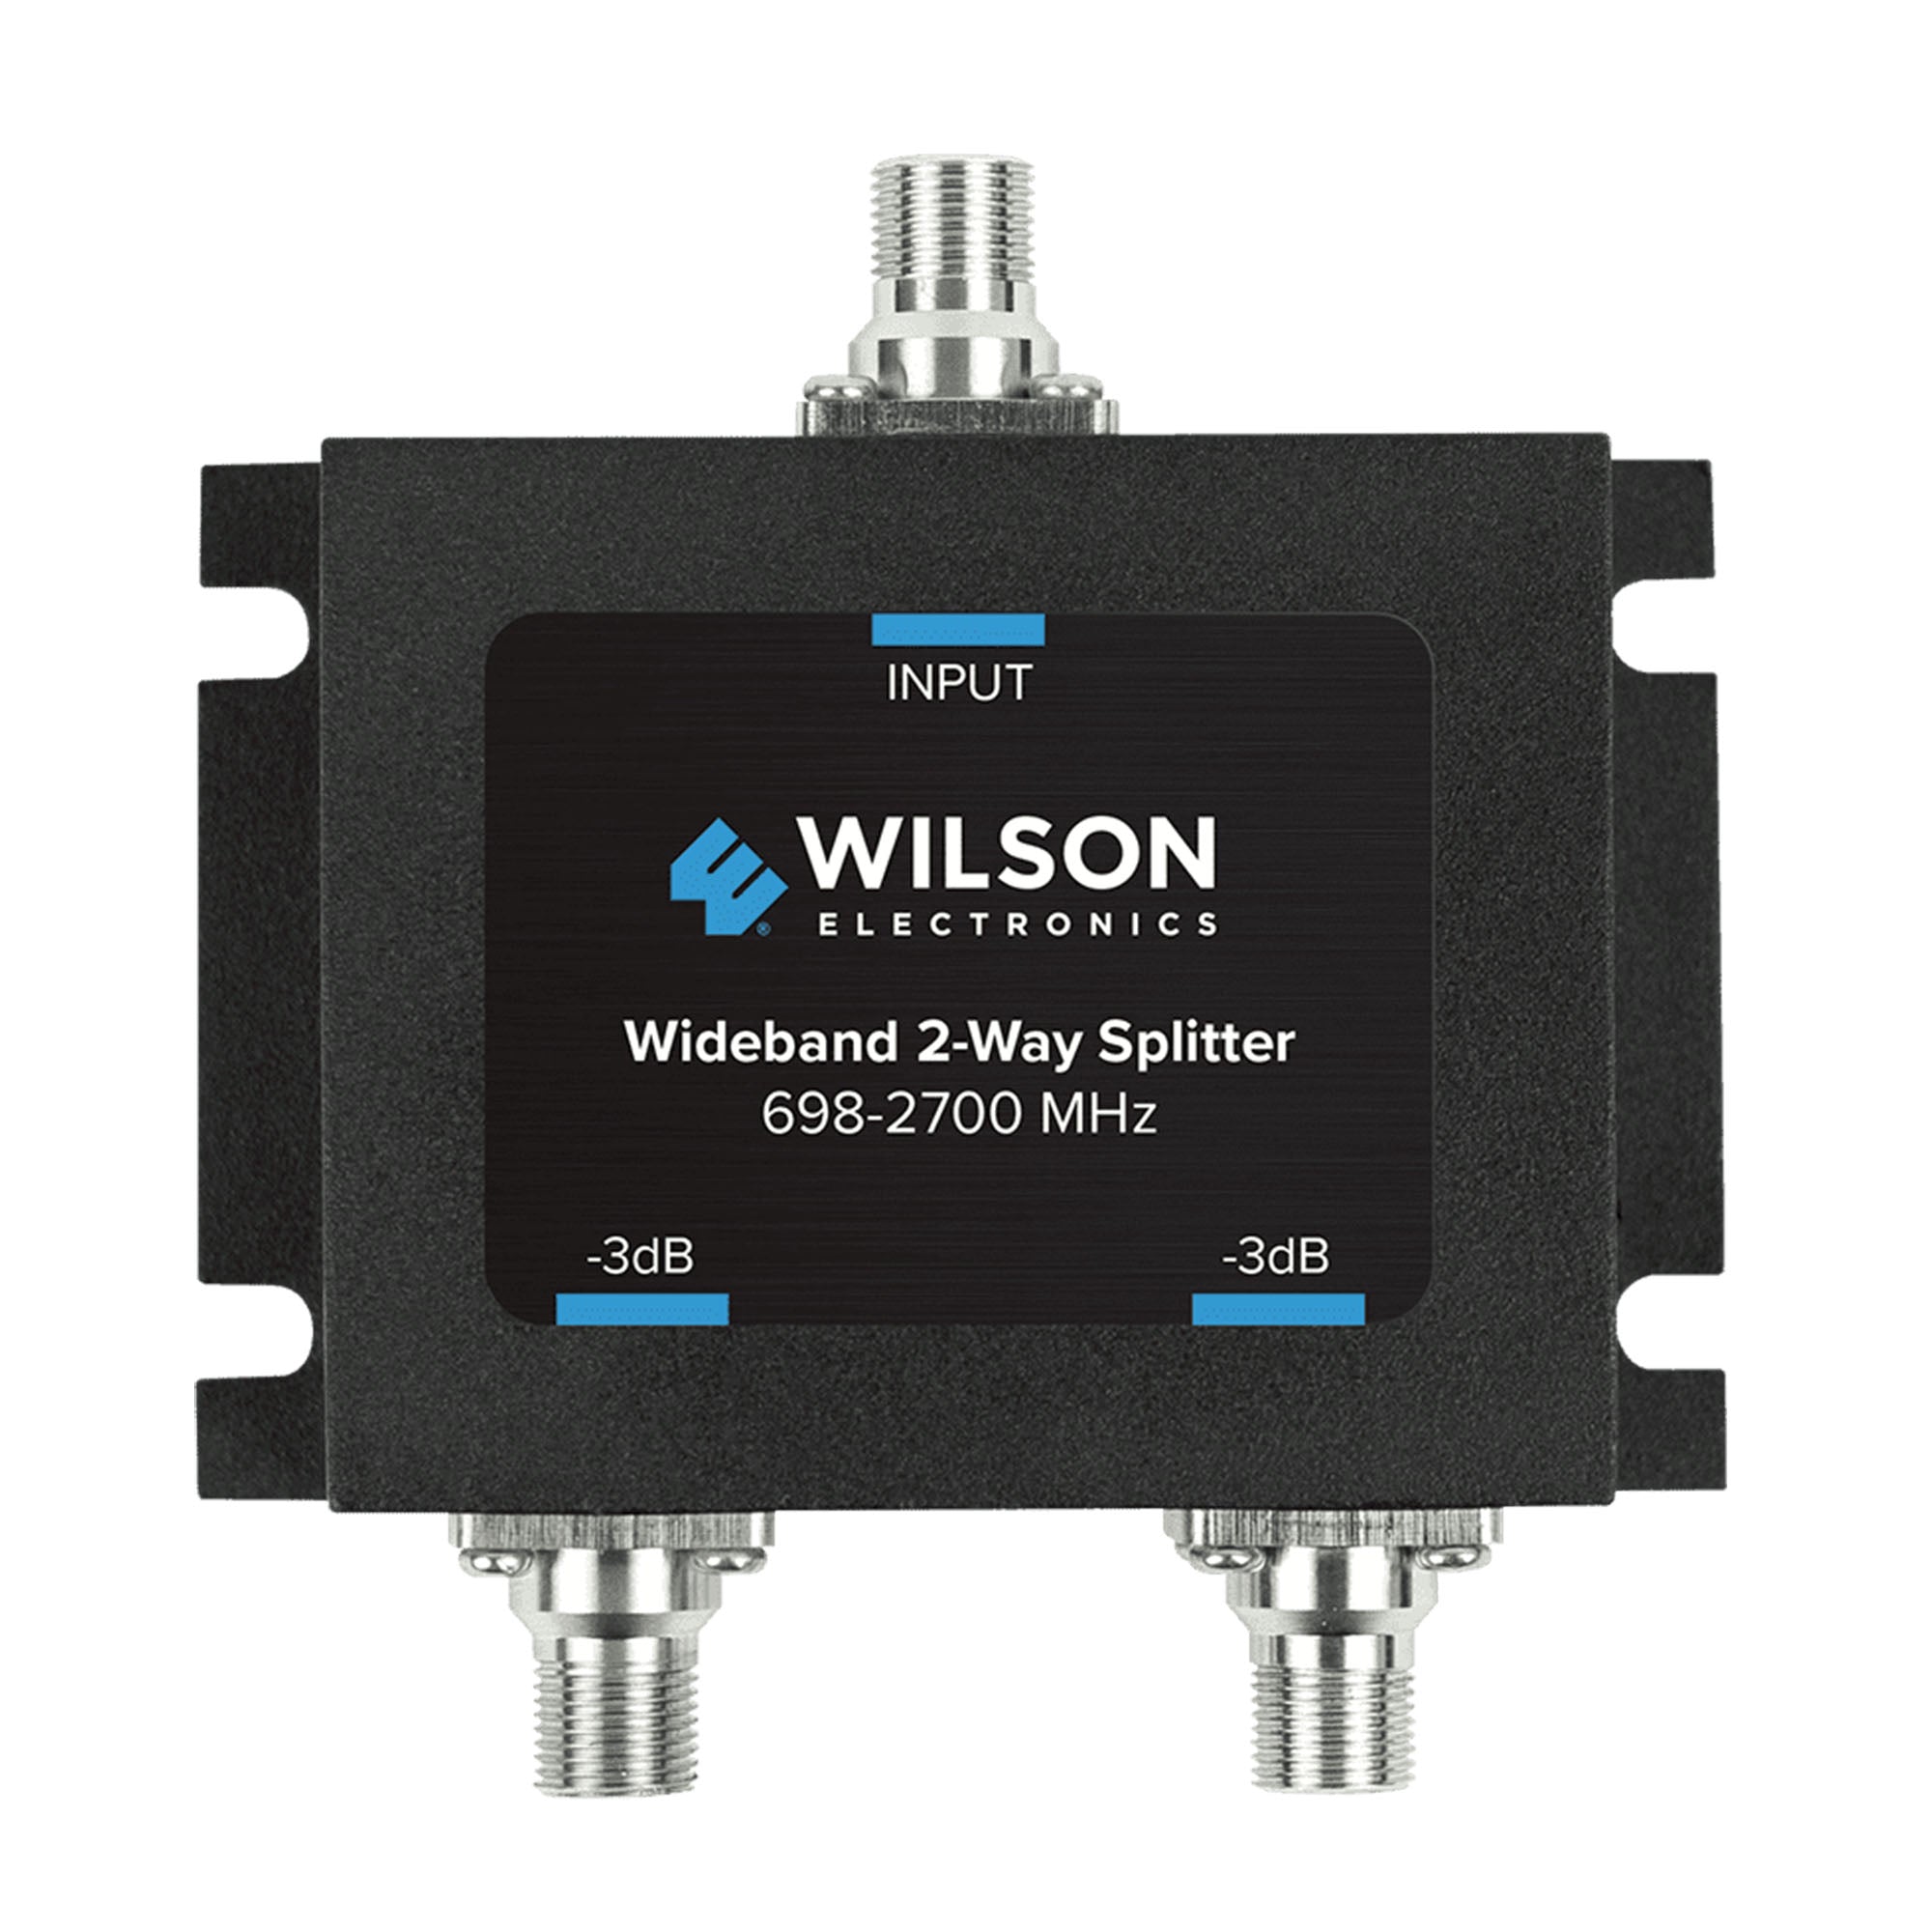 Wilson 2 Way Splitter for 698-2700 MHz w/F Female connector - 15-04298